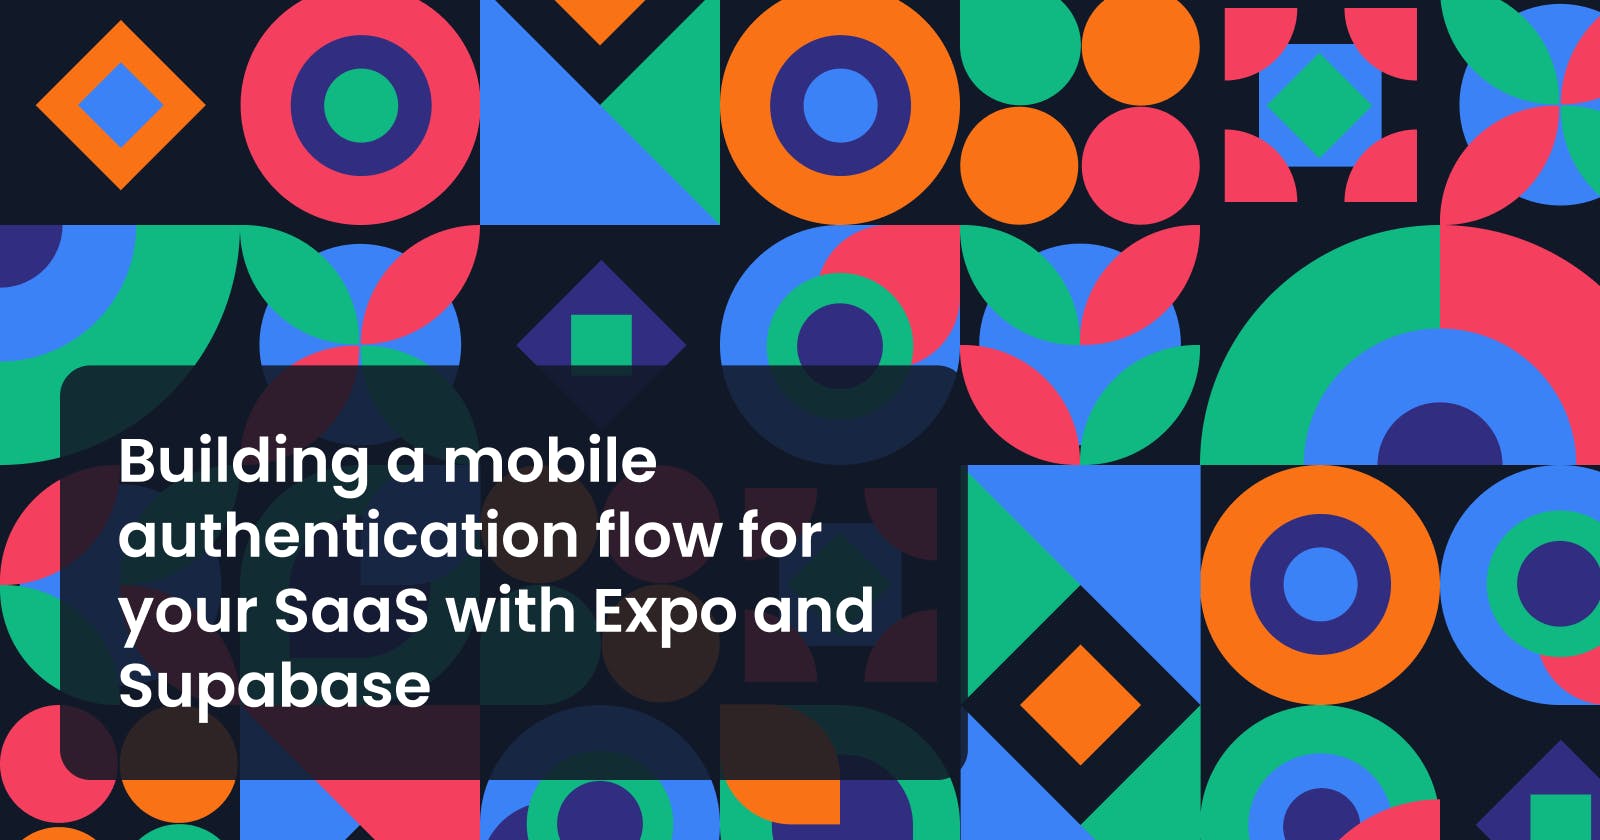 Building a mobile authentication flow for your SaaS with Expo and Supabase